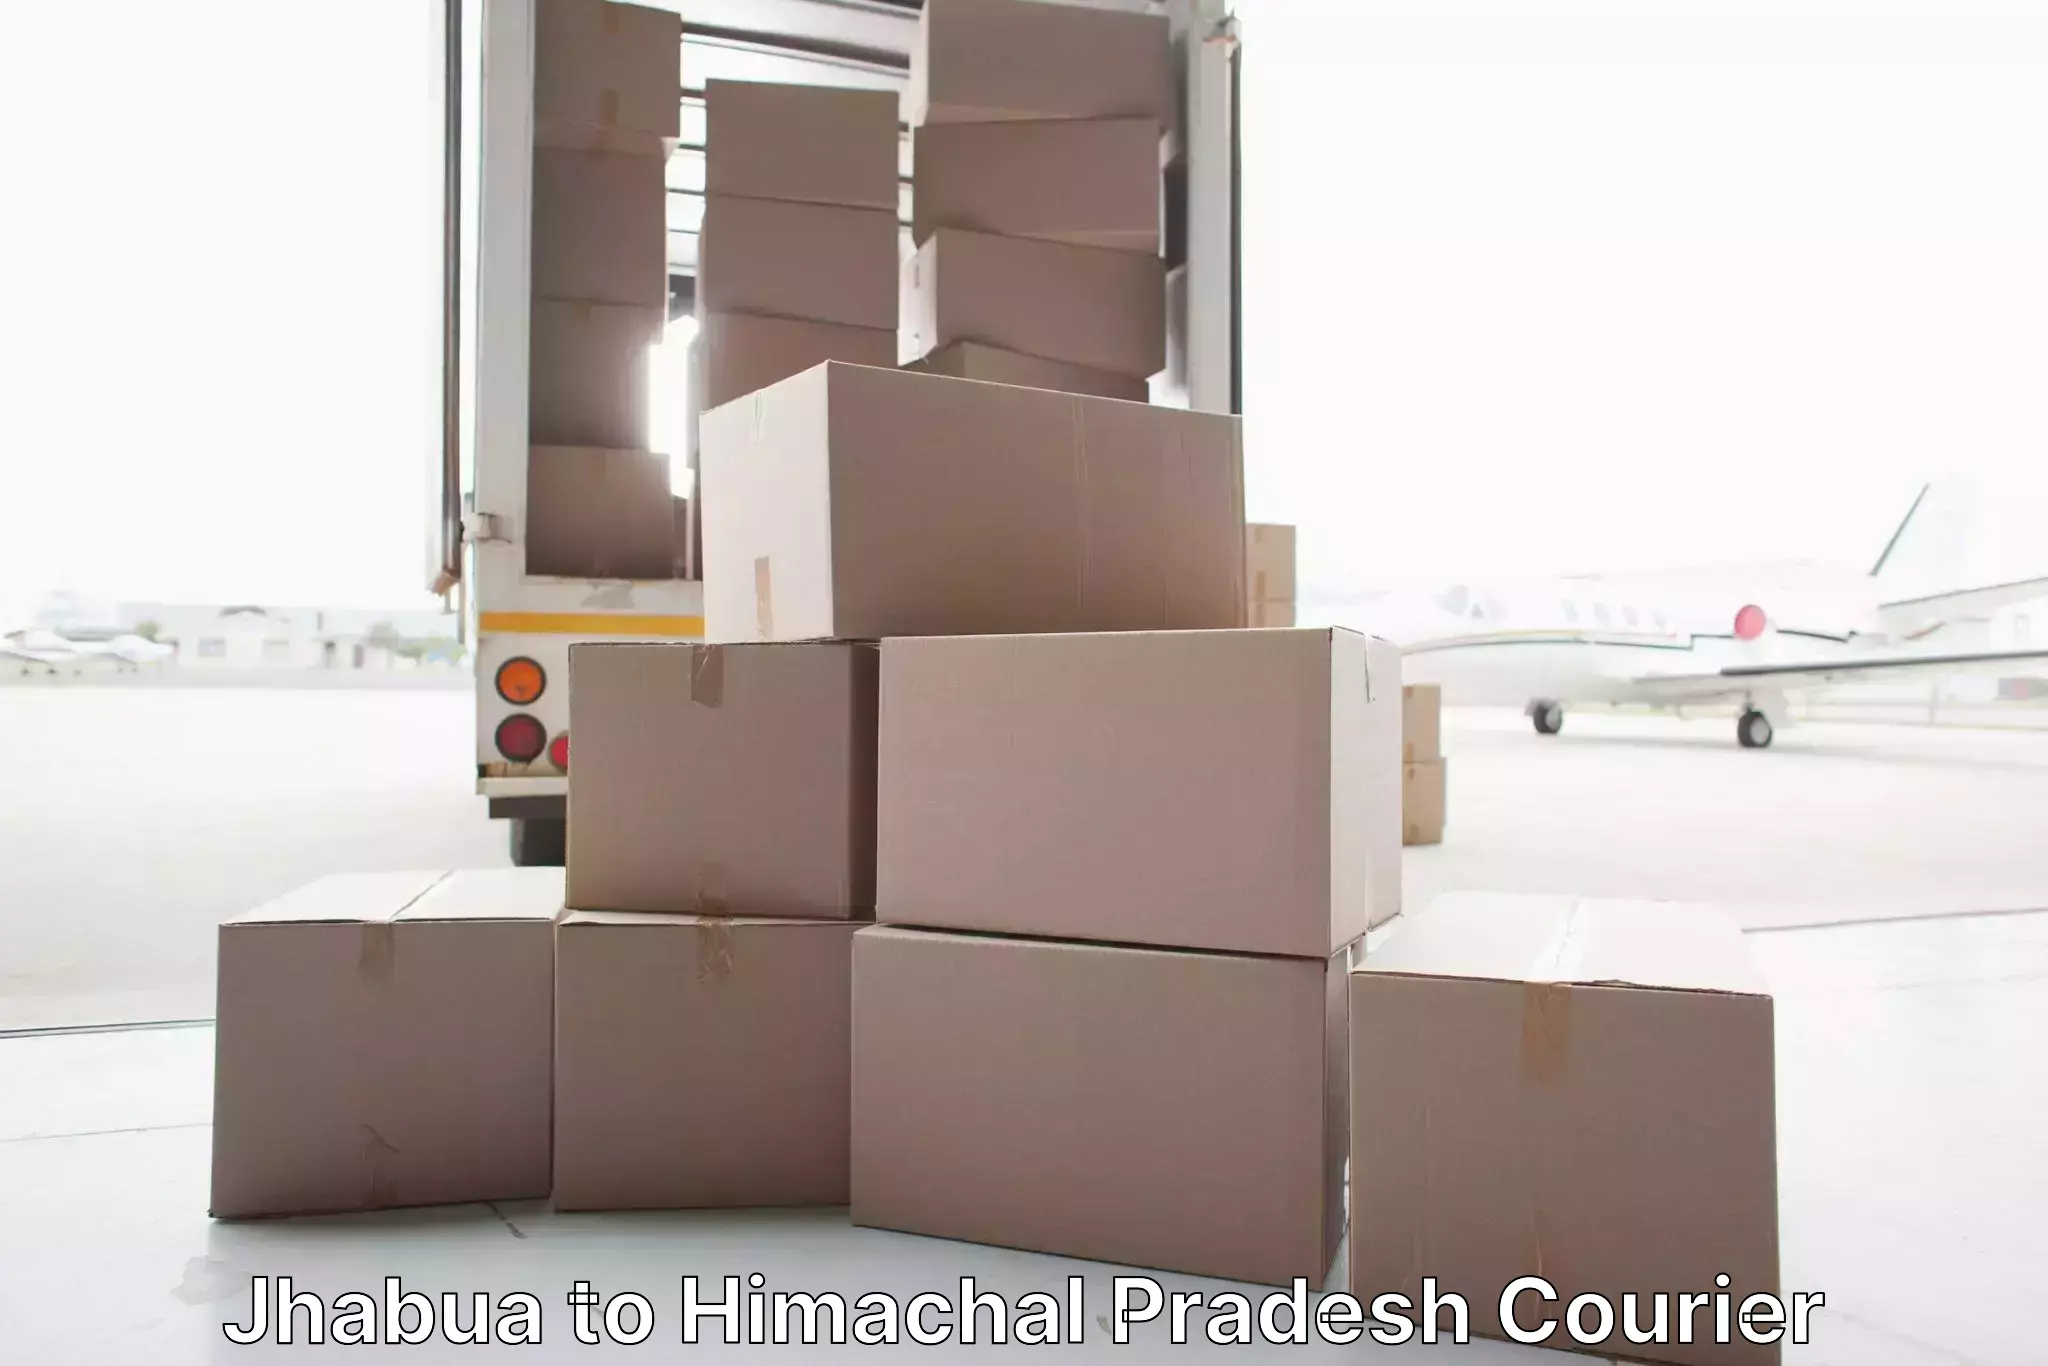 Professional packing services in Jhabua to Himachal Pradesh